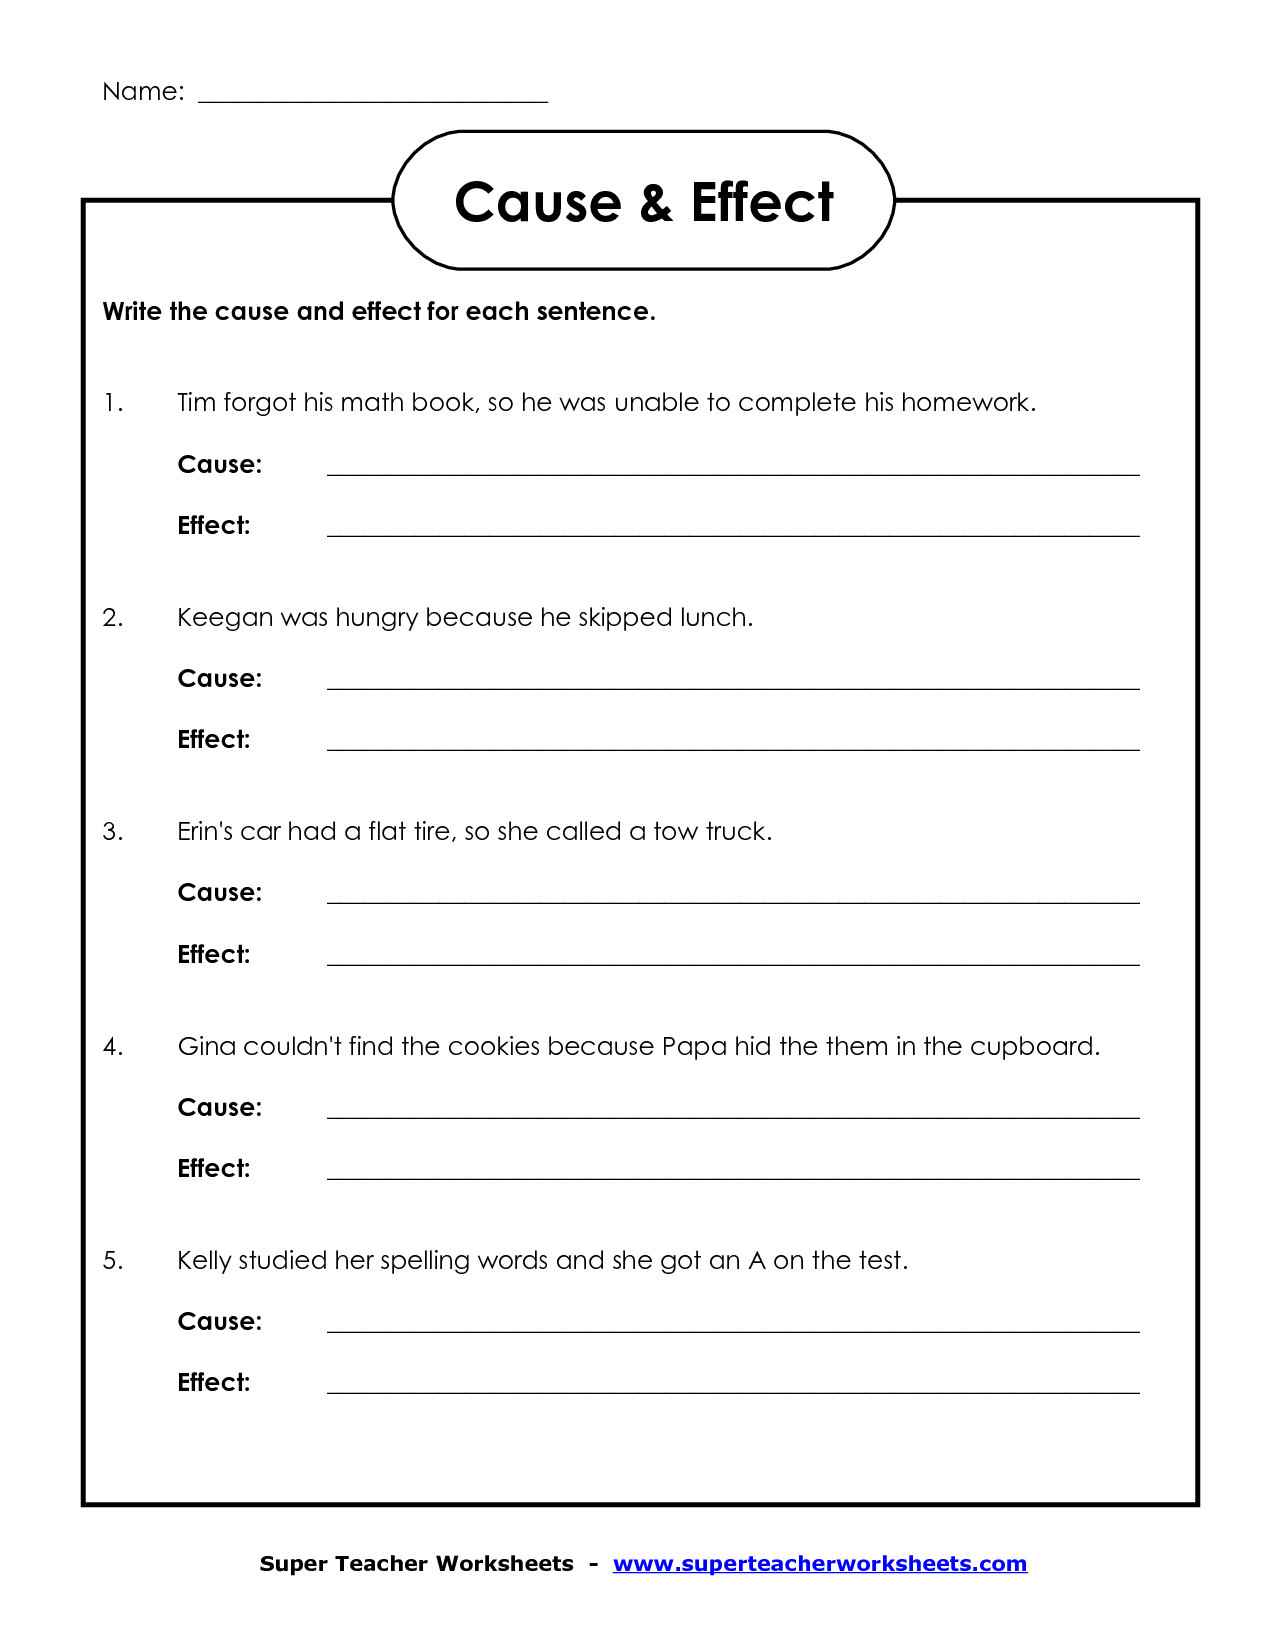 15-best-images-of-cause-and-effect-worksheets-for-kindergarten-cause-and-effect-worksheets-2nd